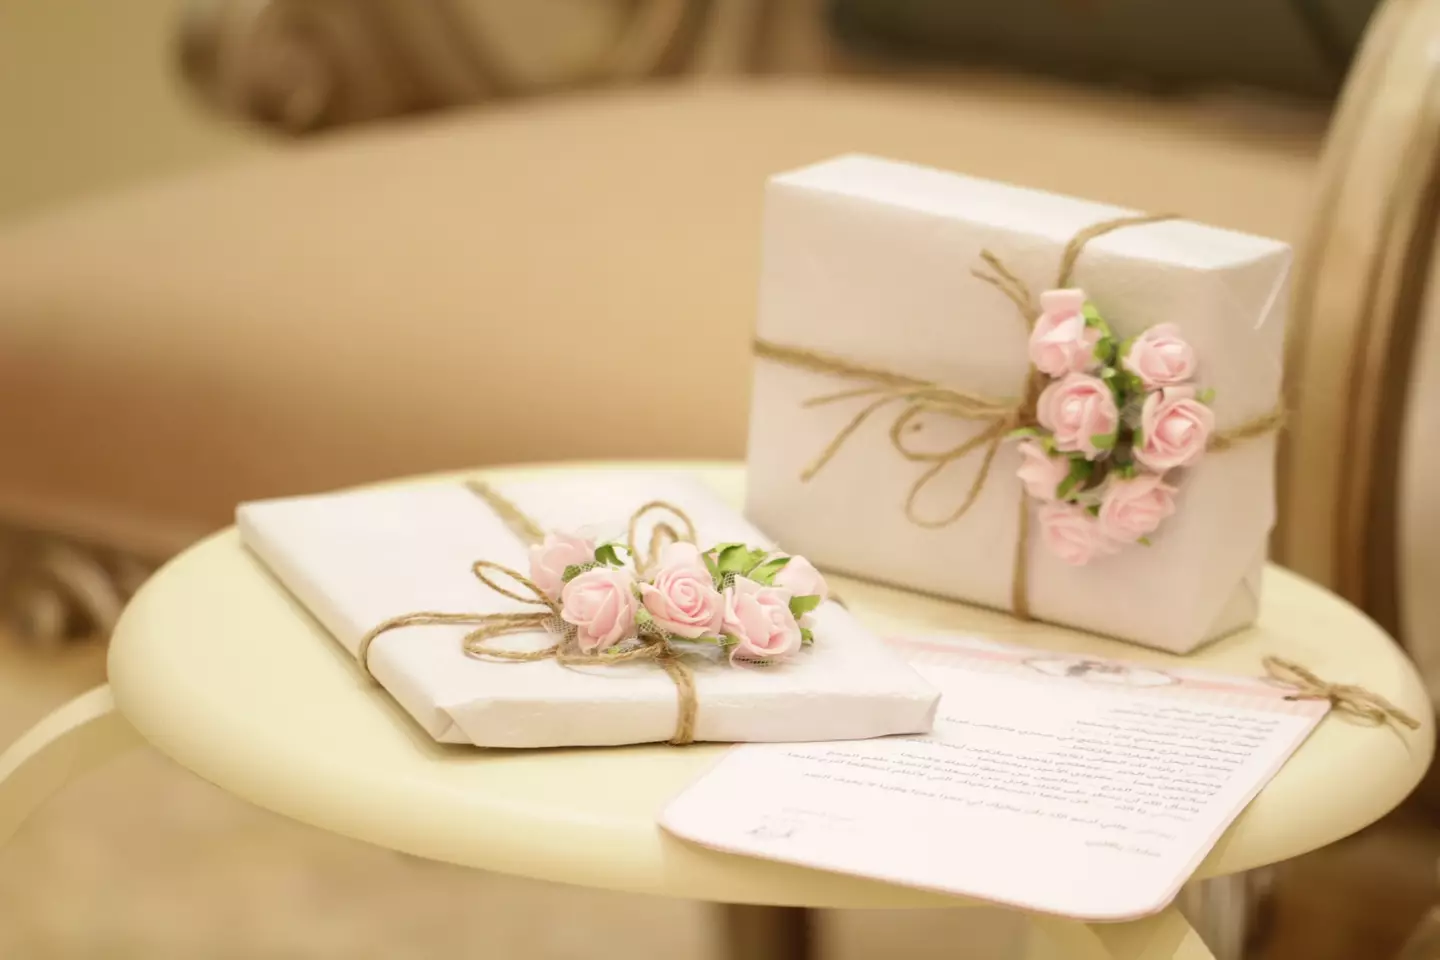 A bride requested all gifts should cost at least $250 (